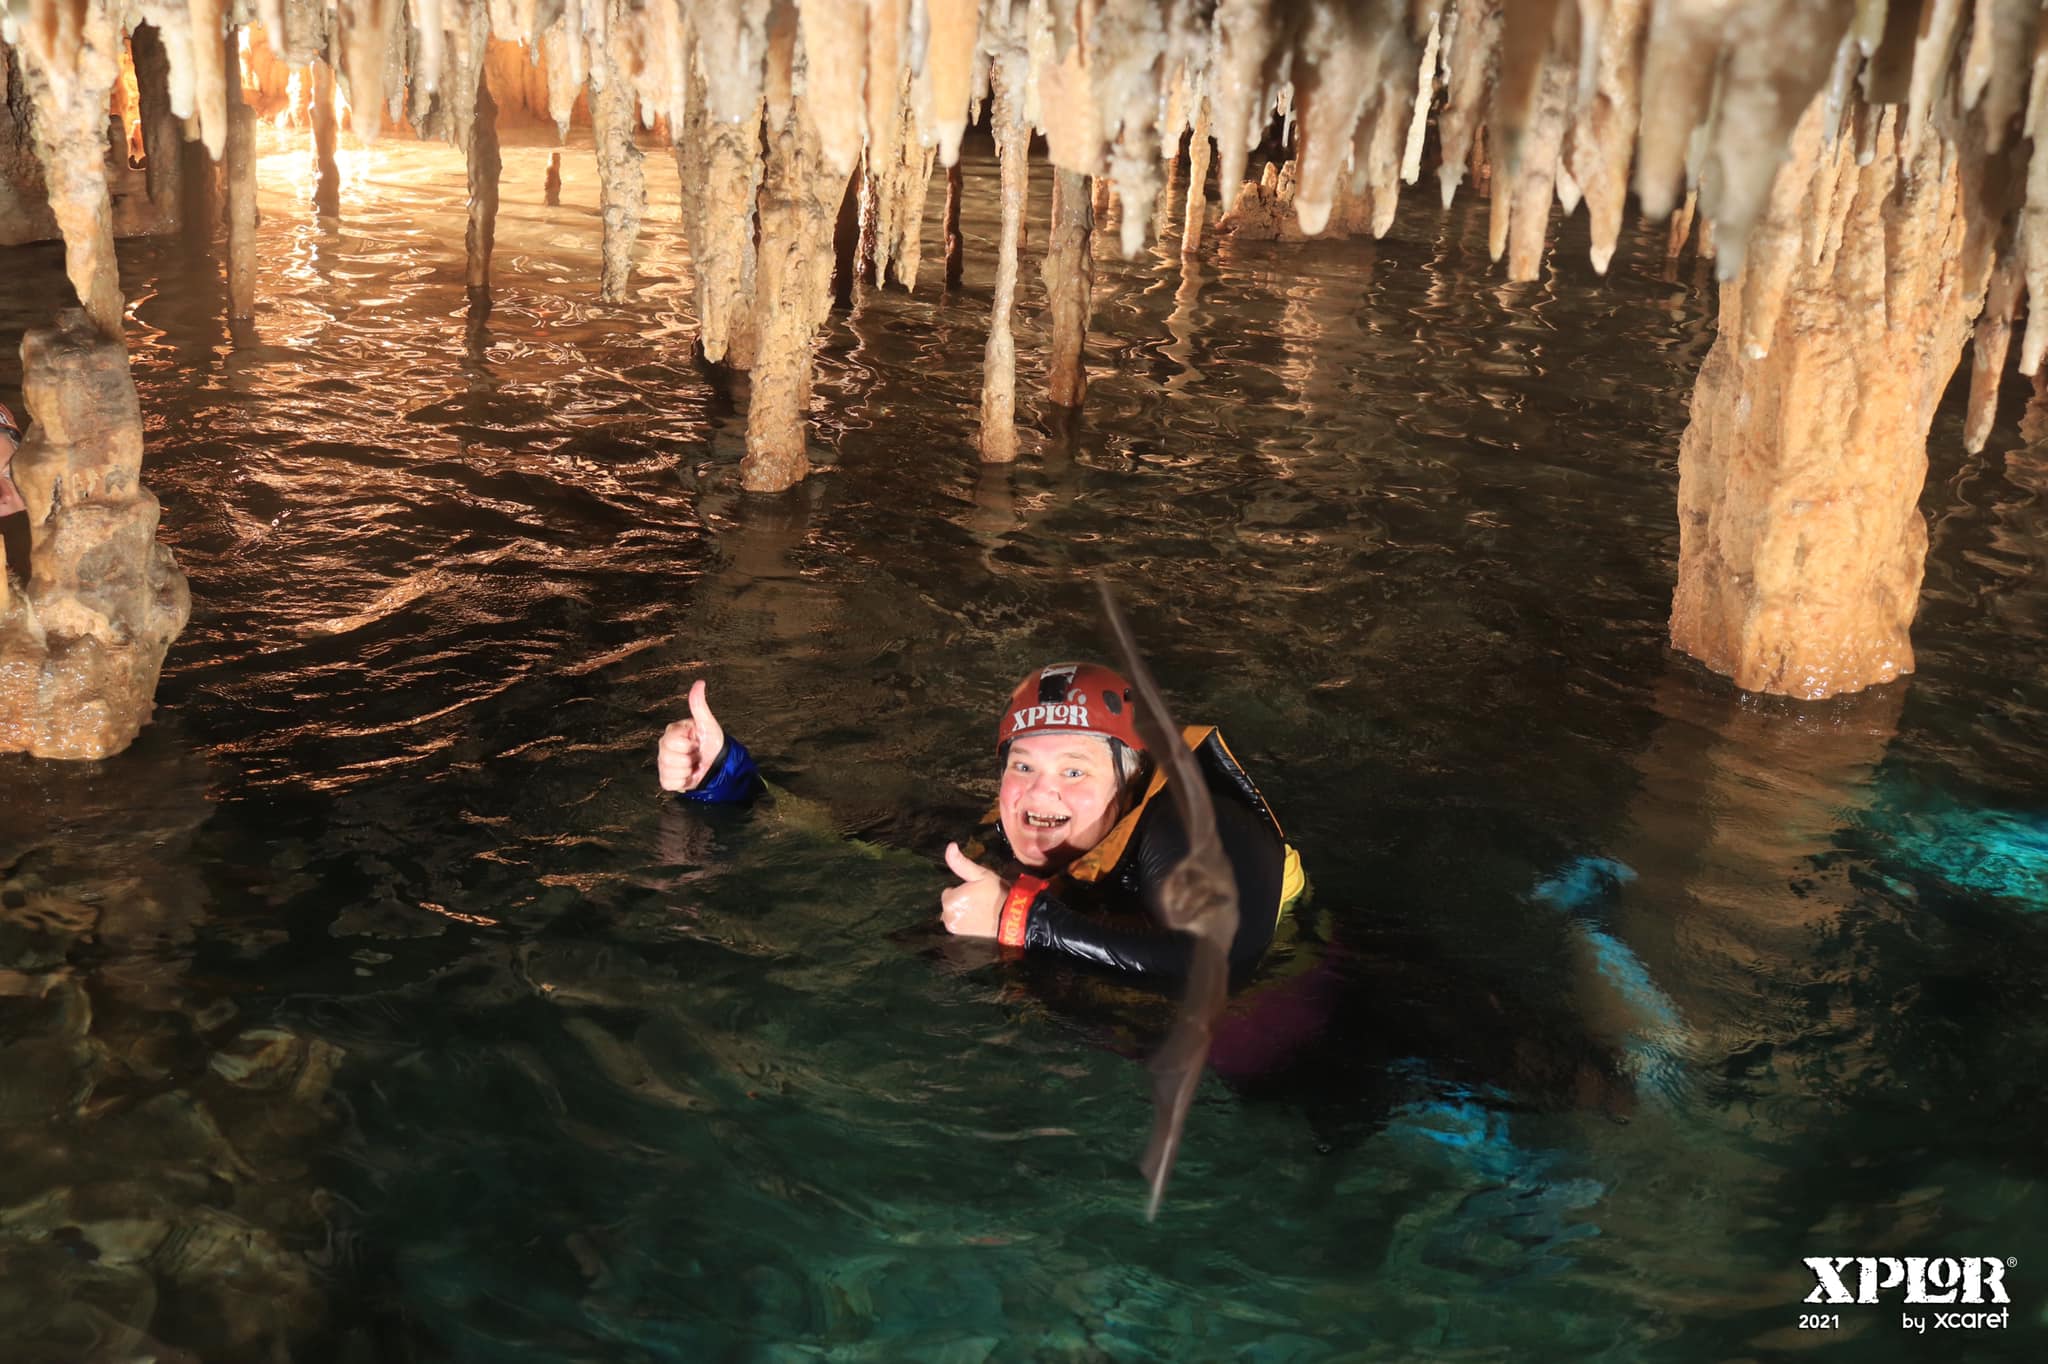 Susan H dives in a cave and a bat flies into the camera frame.